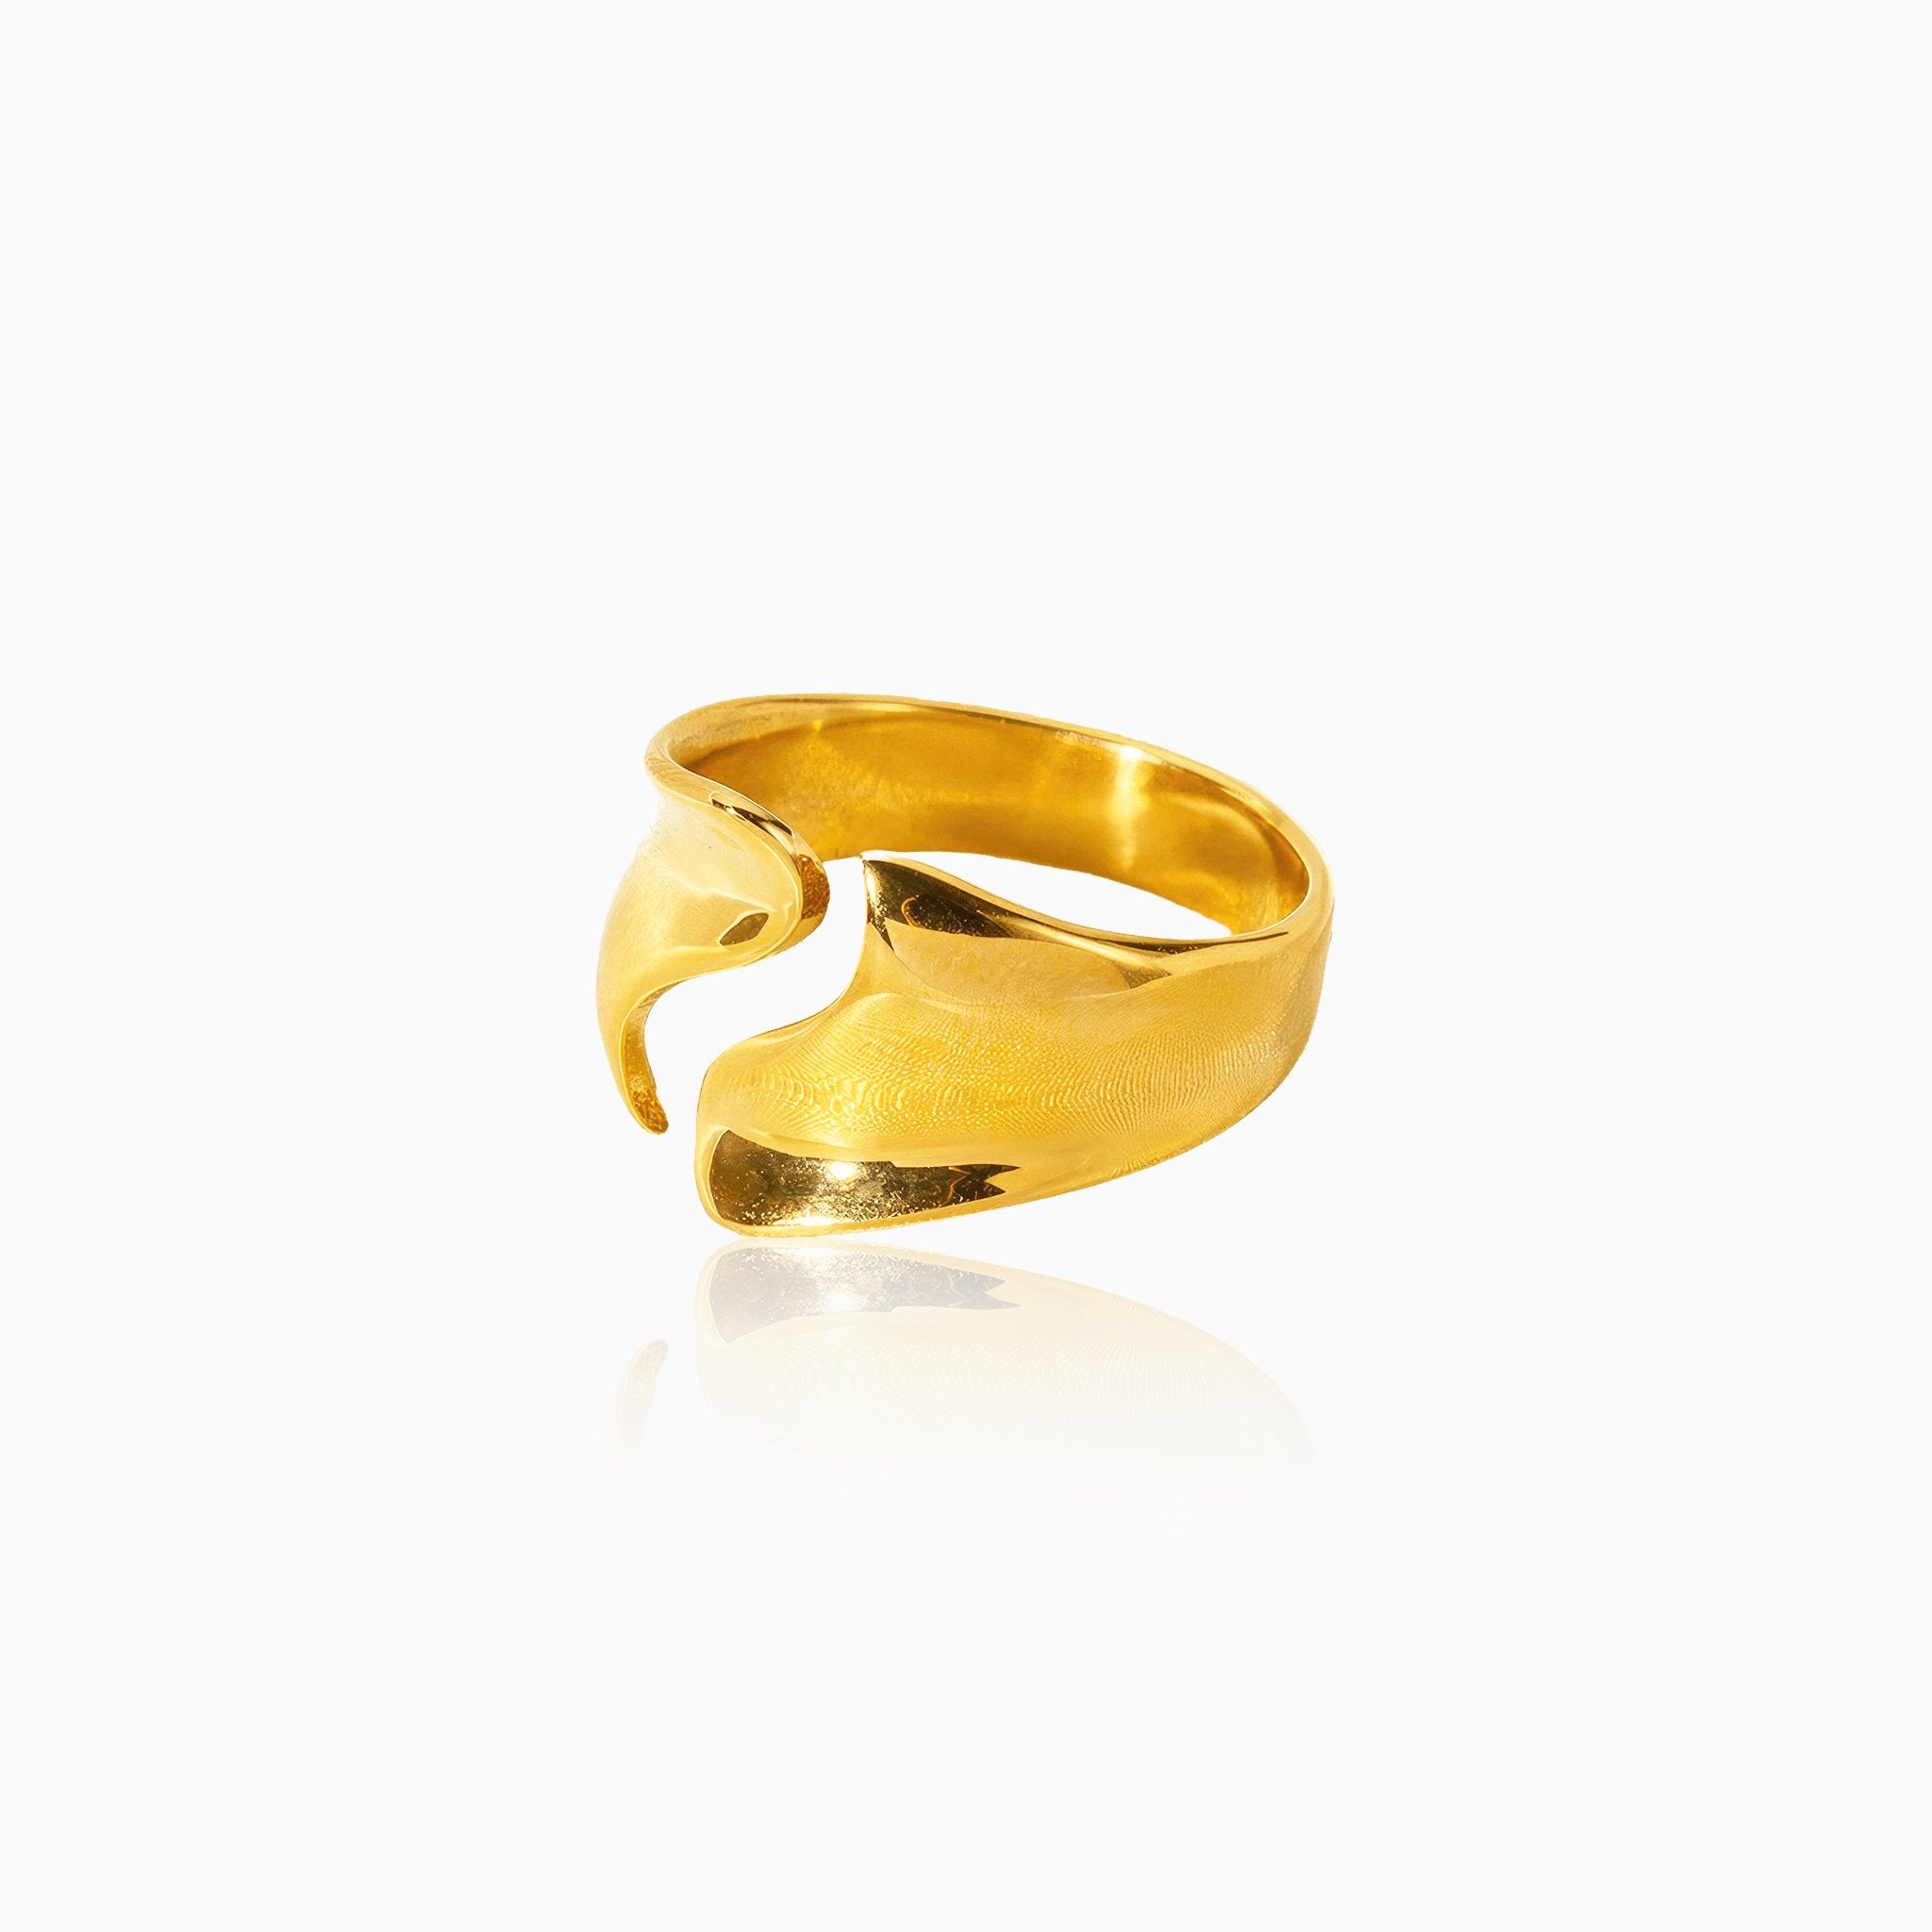 Curved Opening Design Ring - Nobbier - Ring - 18K Gold And Titanium PVD Coated Jewelry